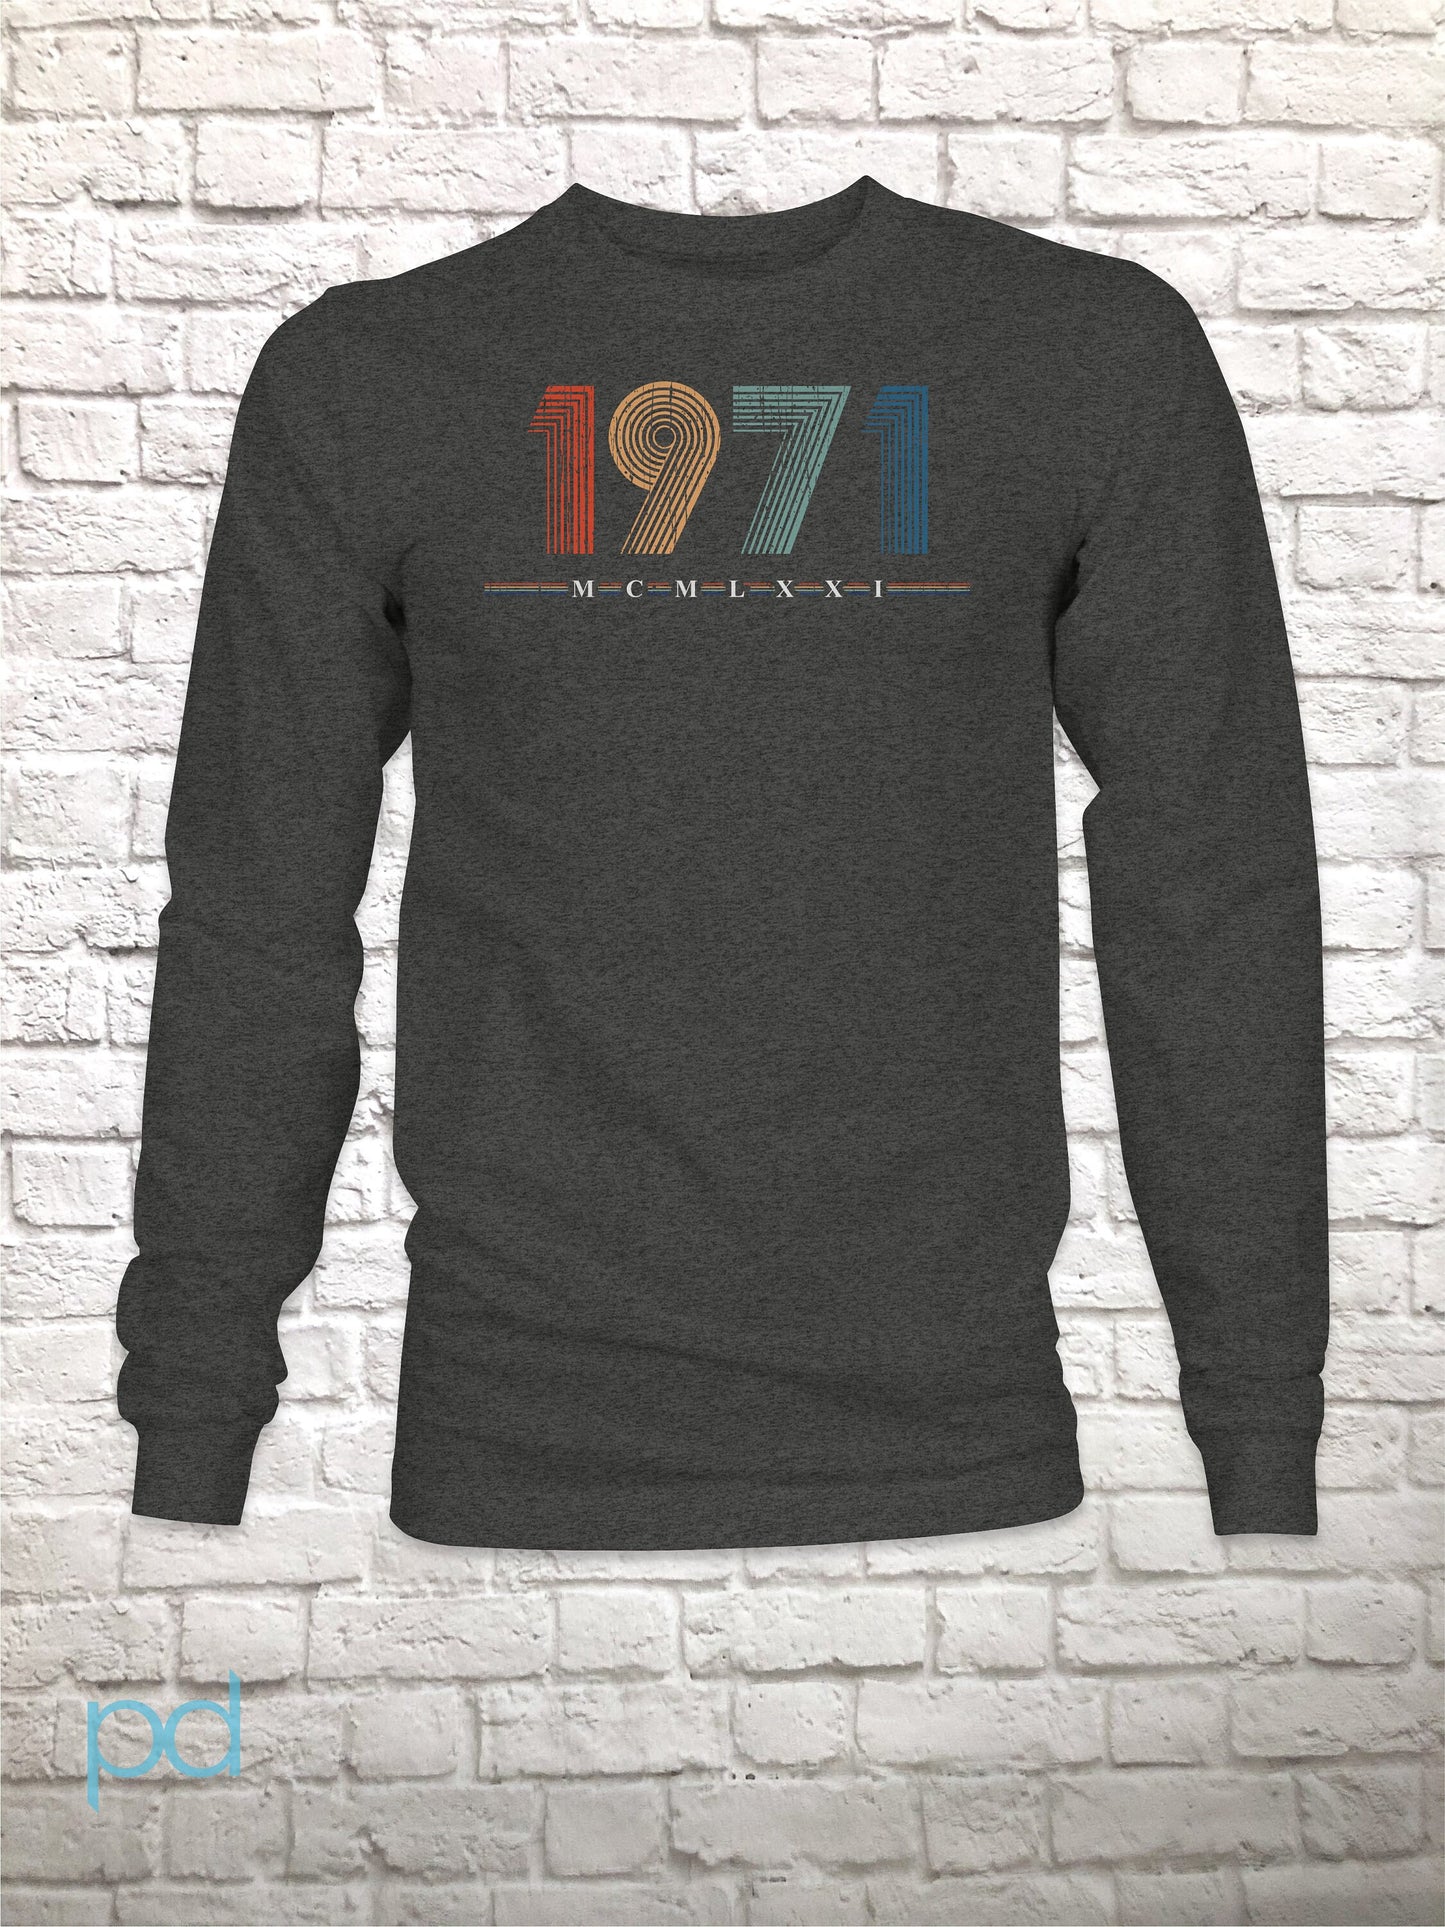 1971 Longsleeve T Shirt, 51st Birthday Gift T-Shirt in Retro & Vintage 70s style, MCMLXXI Fiftieth Bday Tee Shirt Top For Men or Women